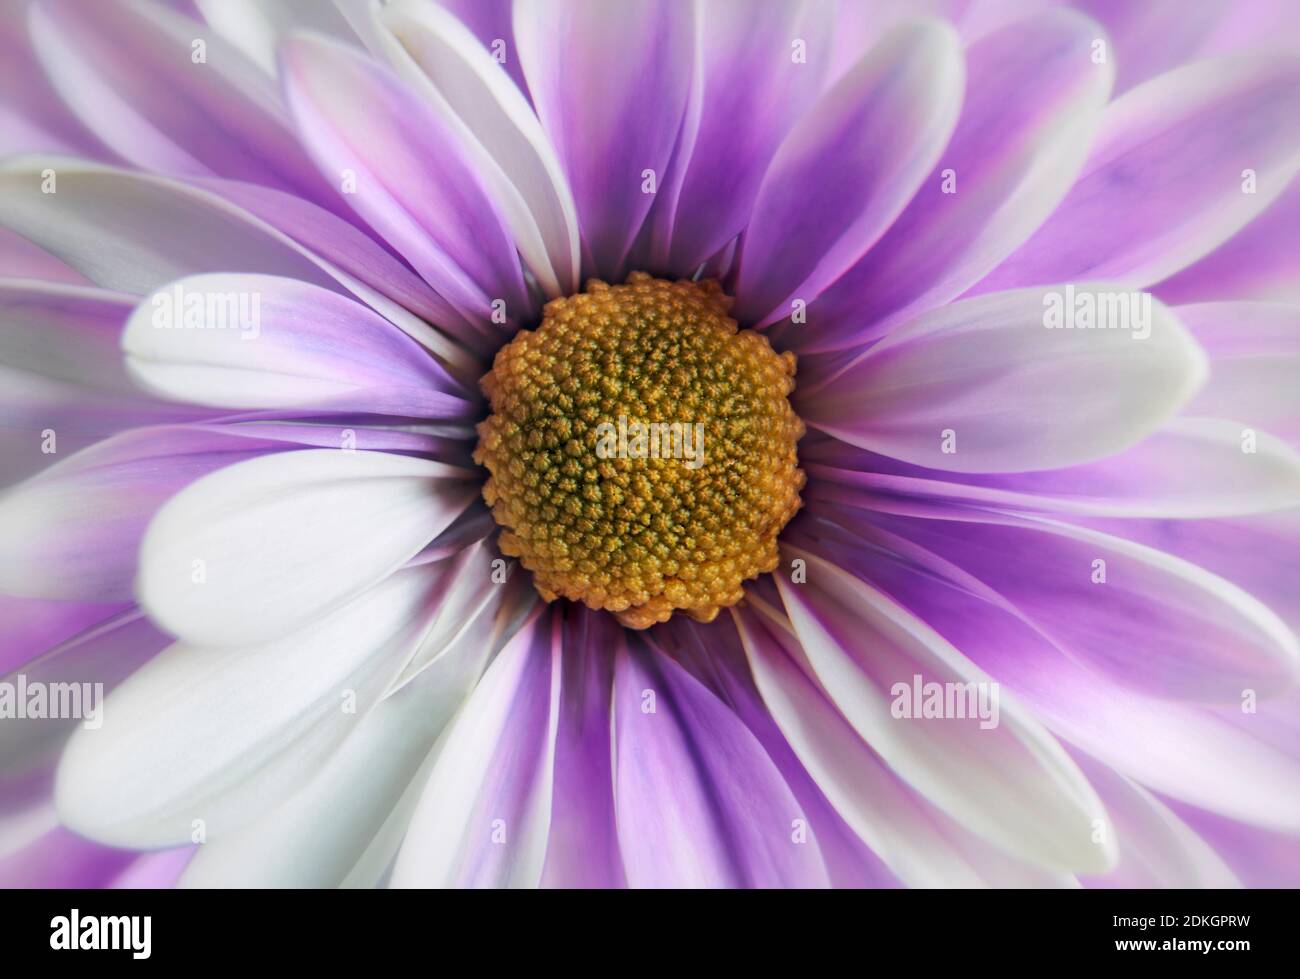 Close up photograph of orange gerbera flower showing the stamen and petals Stock Photo